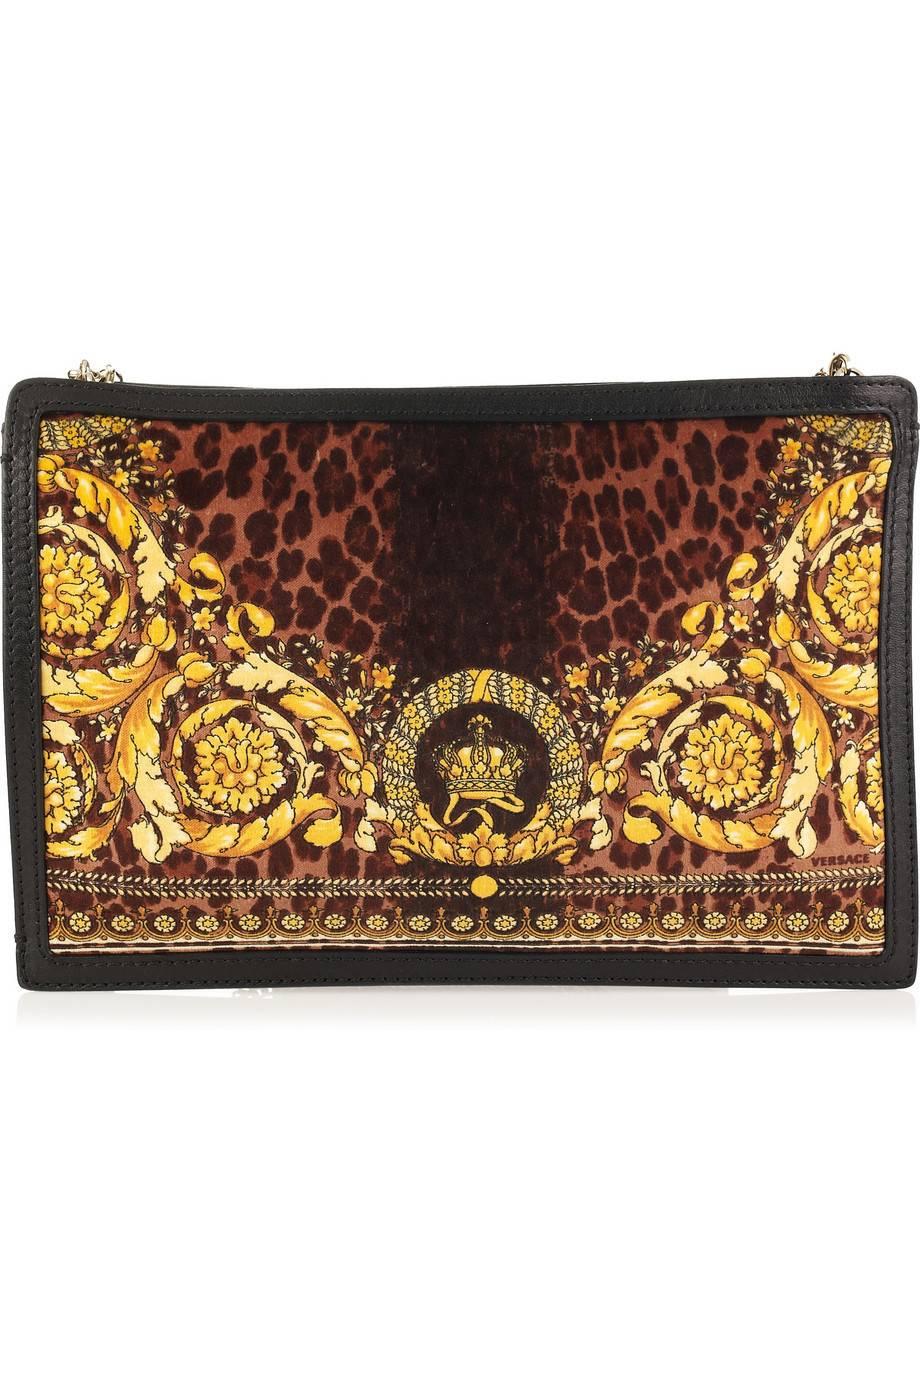 VERSACE

Printed bag / clutch

 Combining signature baroque and animal motifs, this statement piece is perfect as part of a glamorous evening look


Weighs approximately 0.9lbs/ 0.4kg
Depth 2cm
Handle Drop 21cm
Height 17cm
Width 25cm
Zip fastening